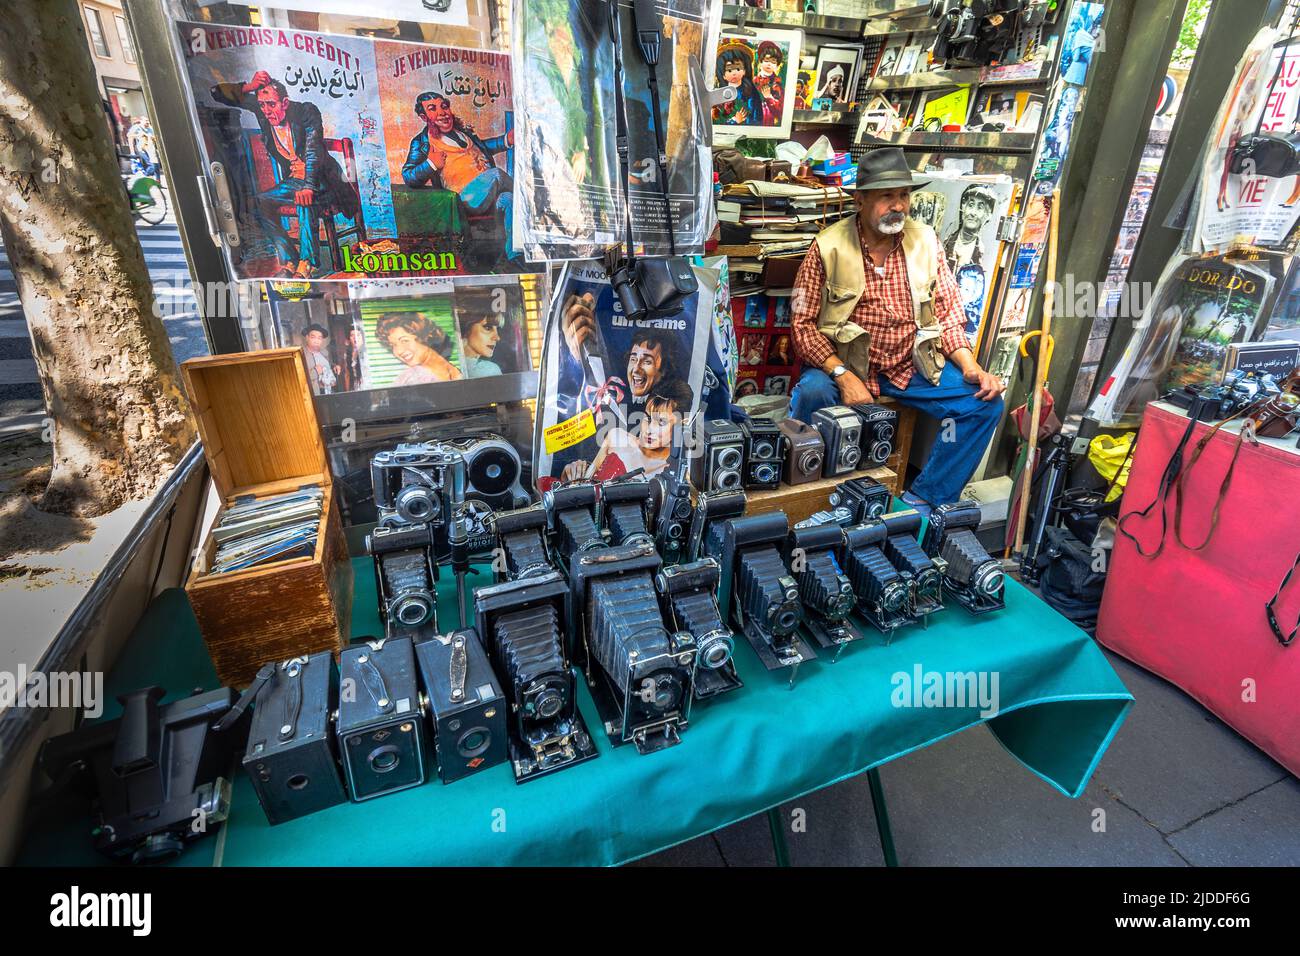 Stall on Parisian street with old folding film cameras for sale - Paris 6, France. Stock Photo